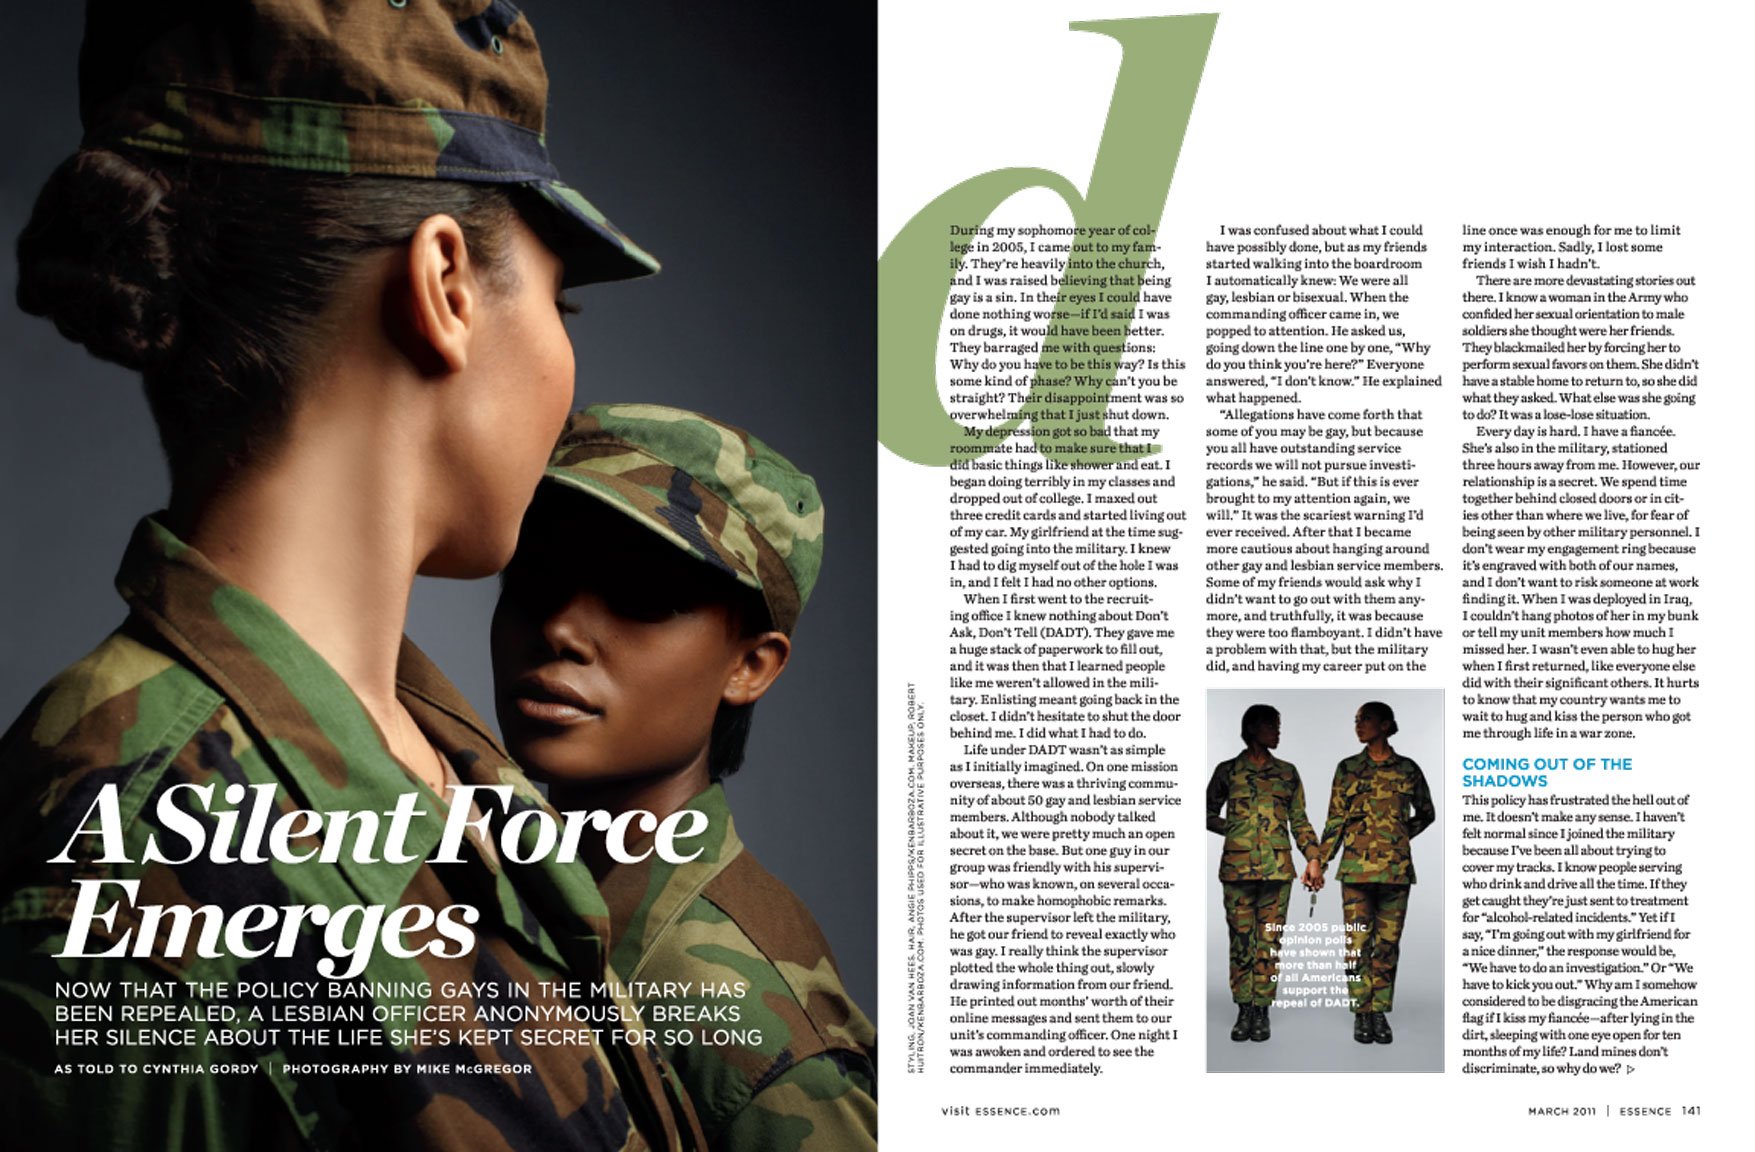 A Slient Force Emerges: Gays in the Military